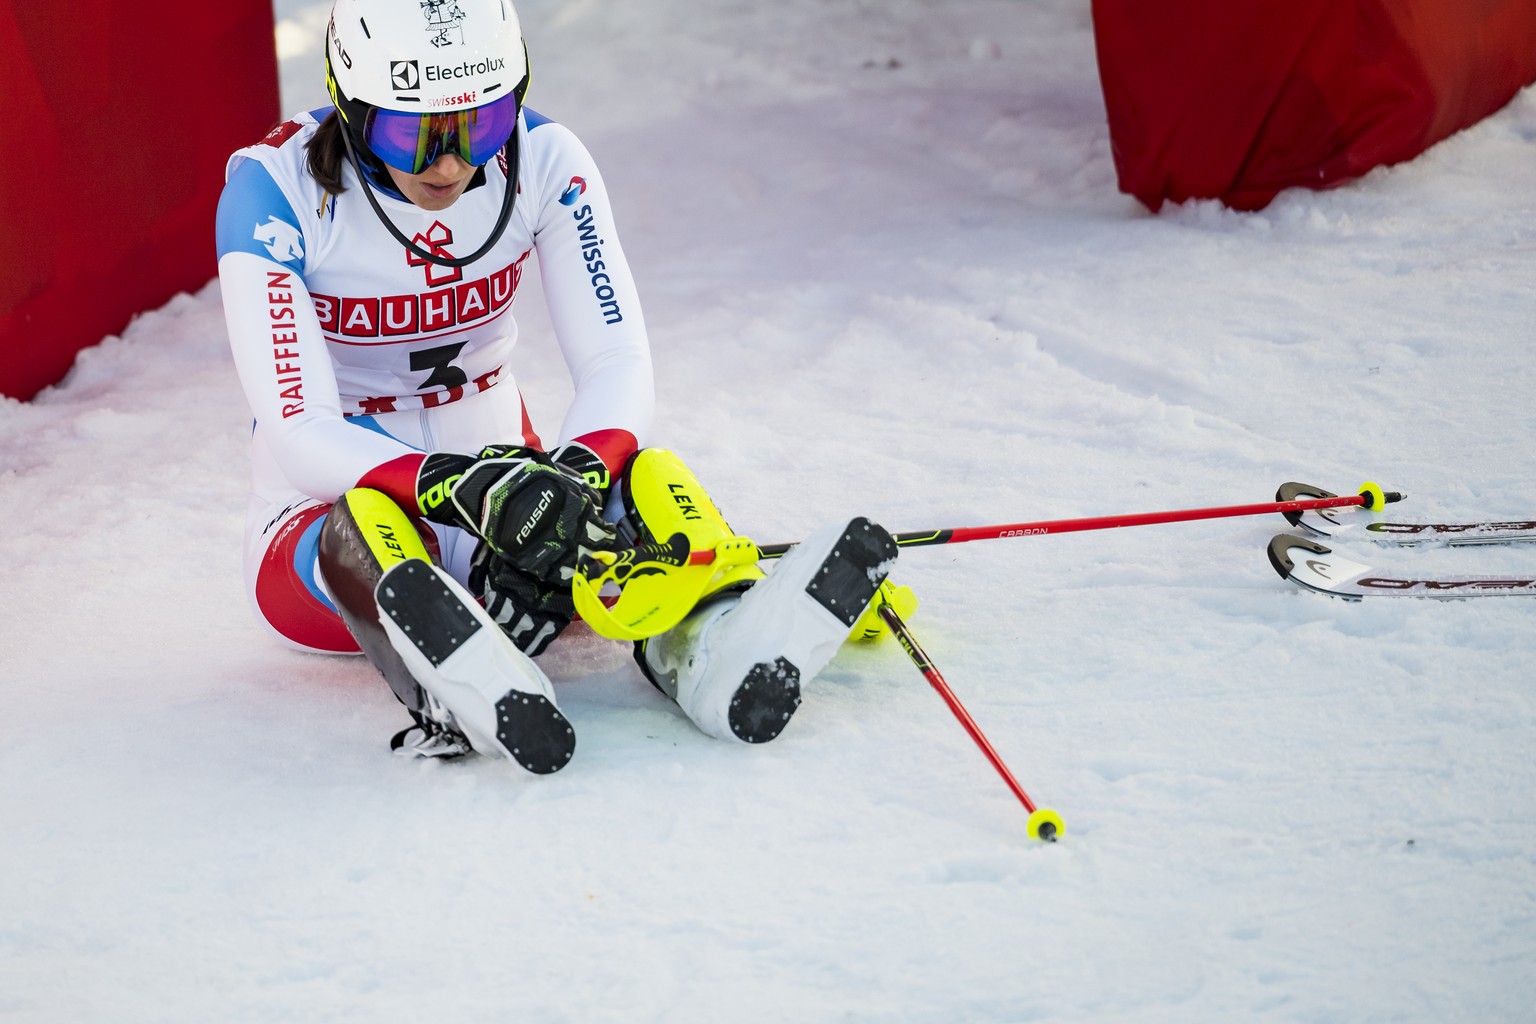 Wendy Holdener of Switzerland reacts in the finish area during the second run of the women Slalom race at the 2019 FIS Alpine Skiing World Championships in Are, Sweden Saturday, February 16, 2019. (KE ...